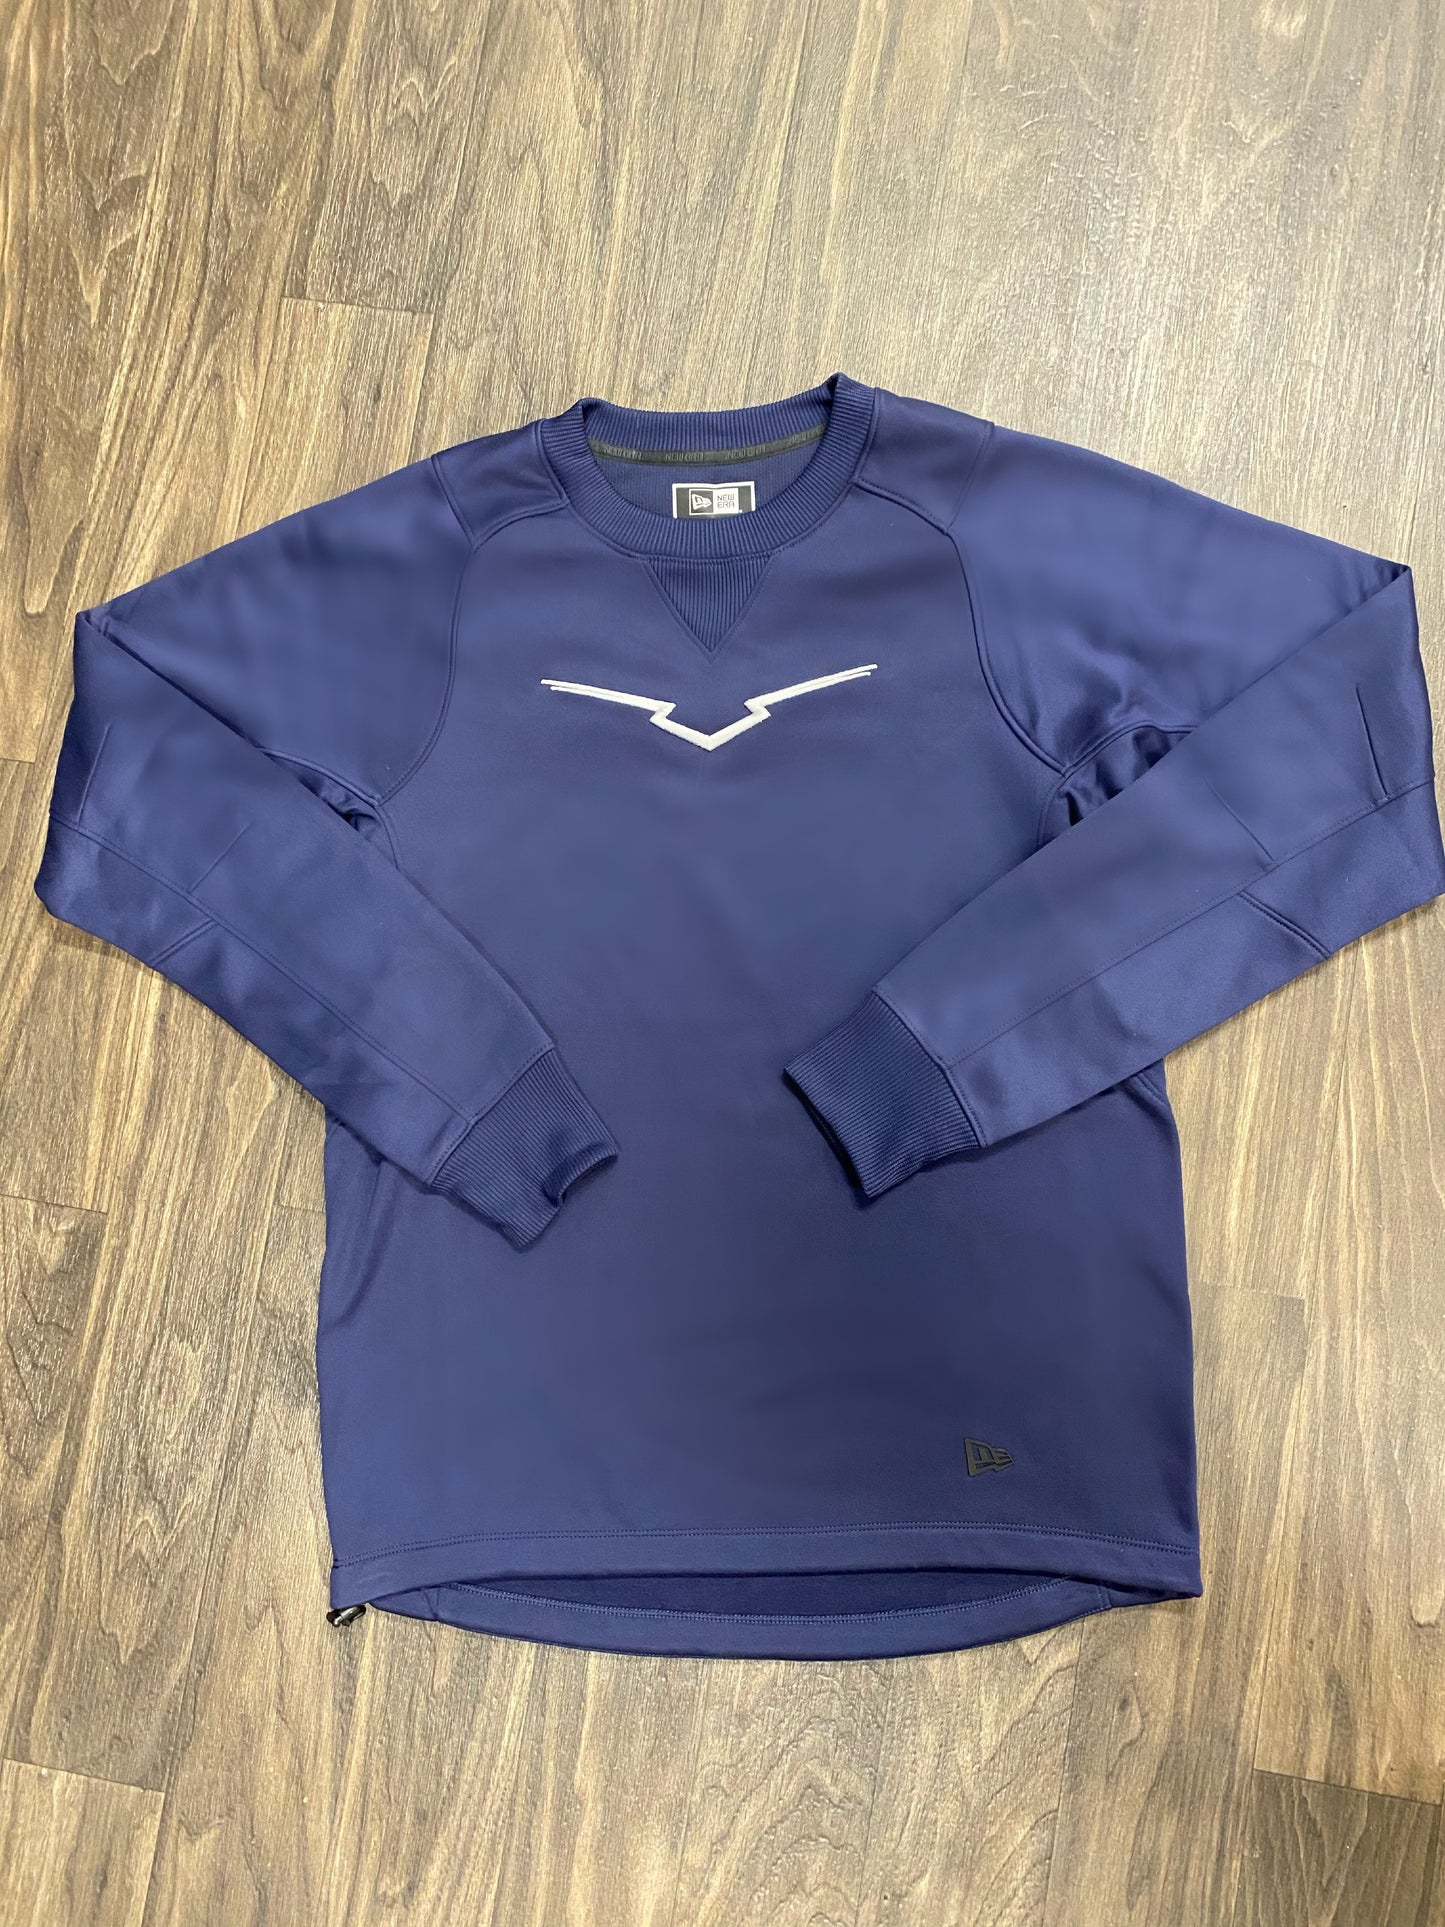 Navy Embroidered Top Notch Crew Neck